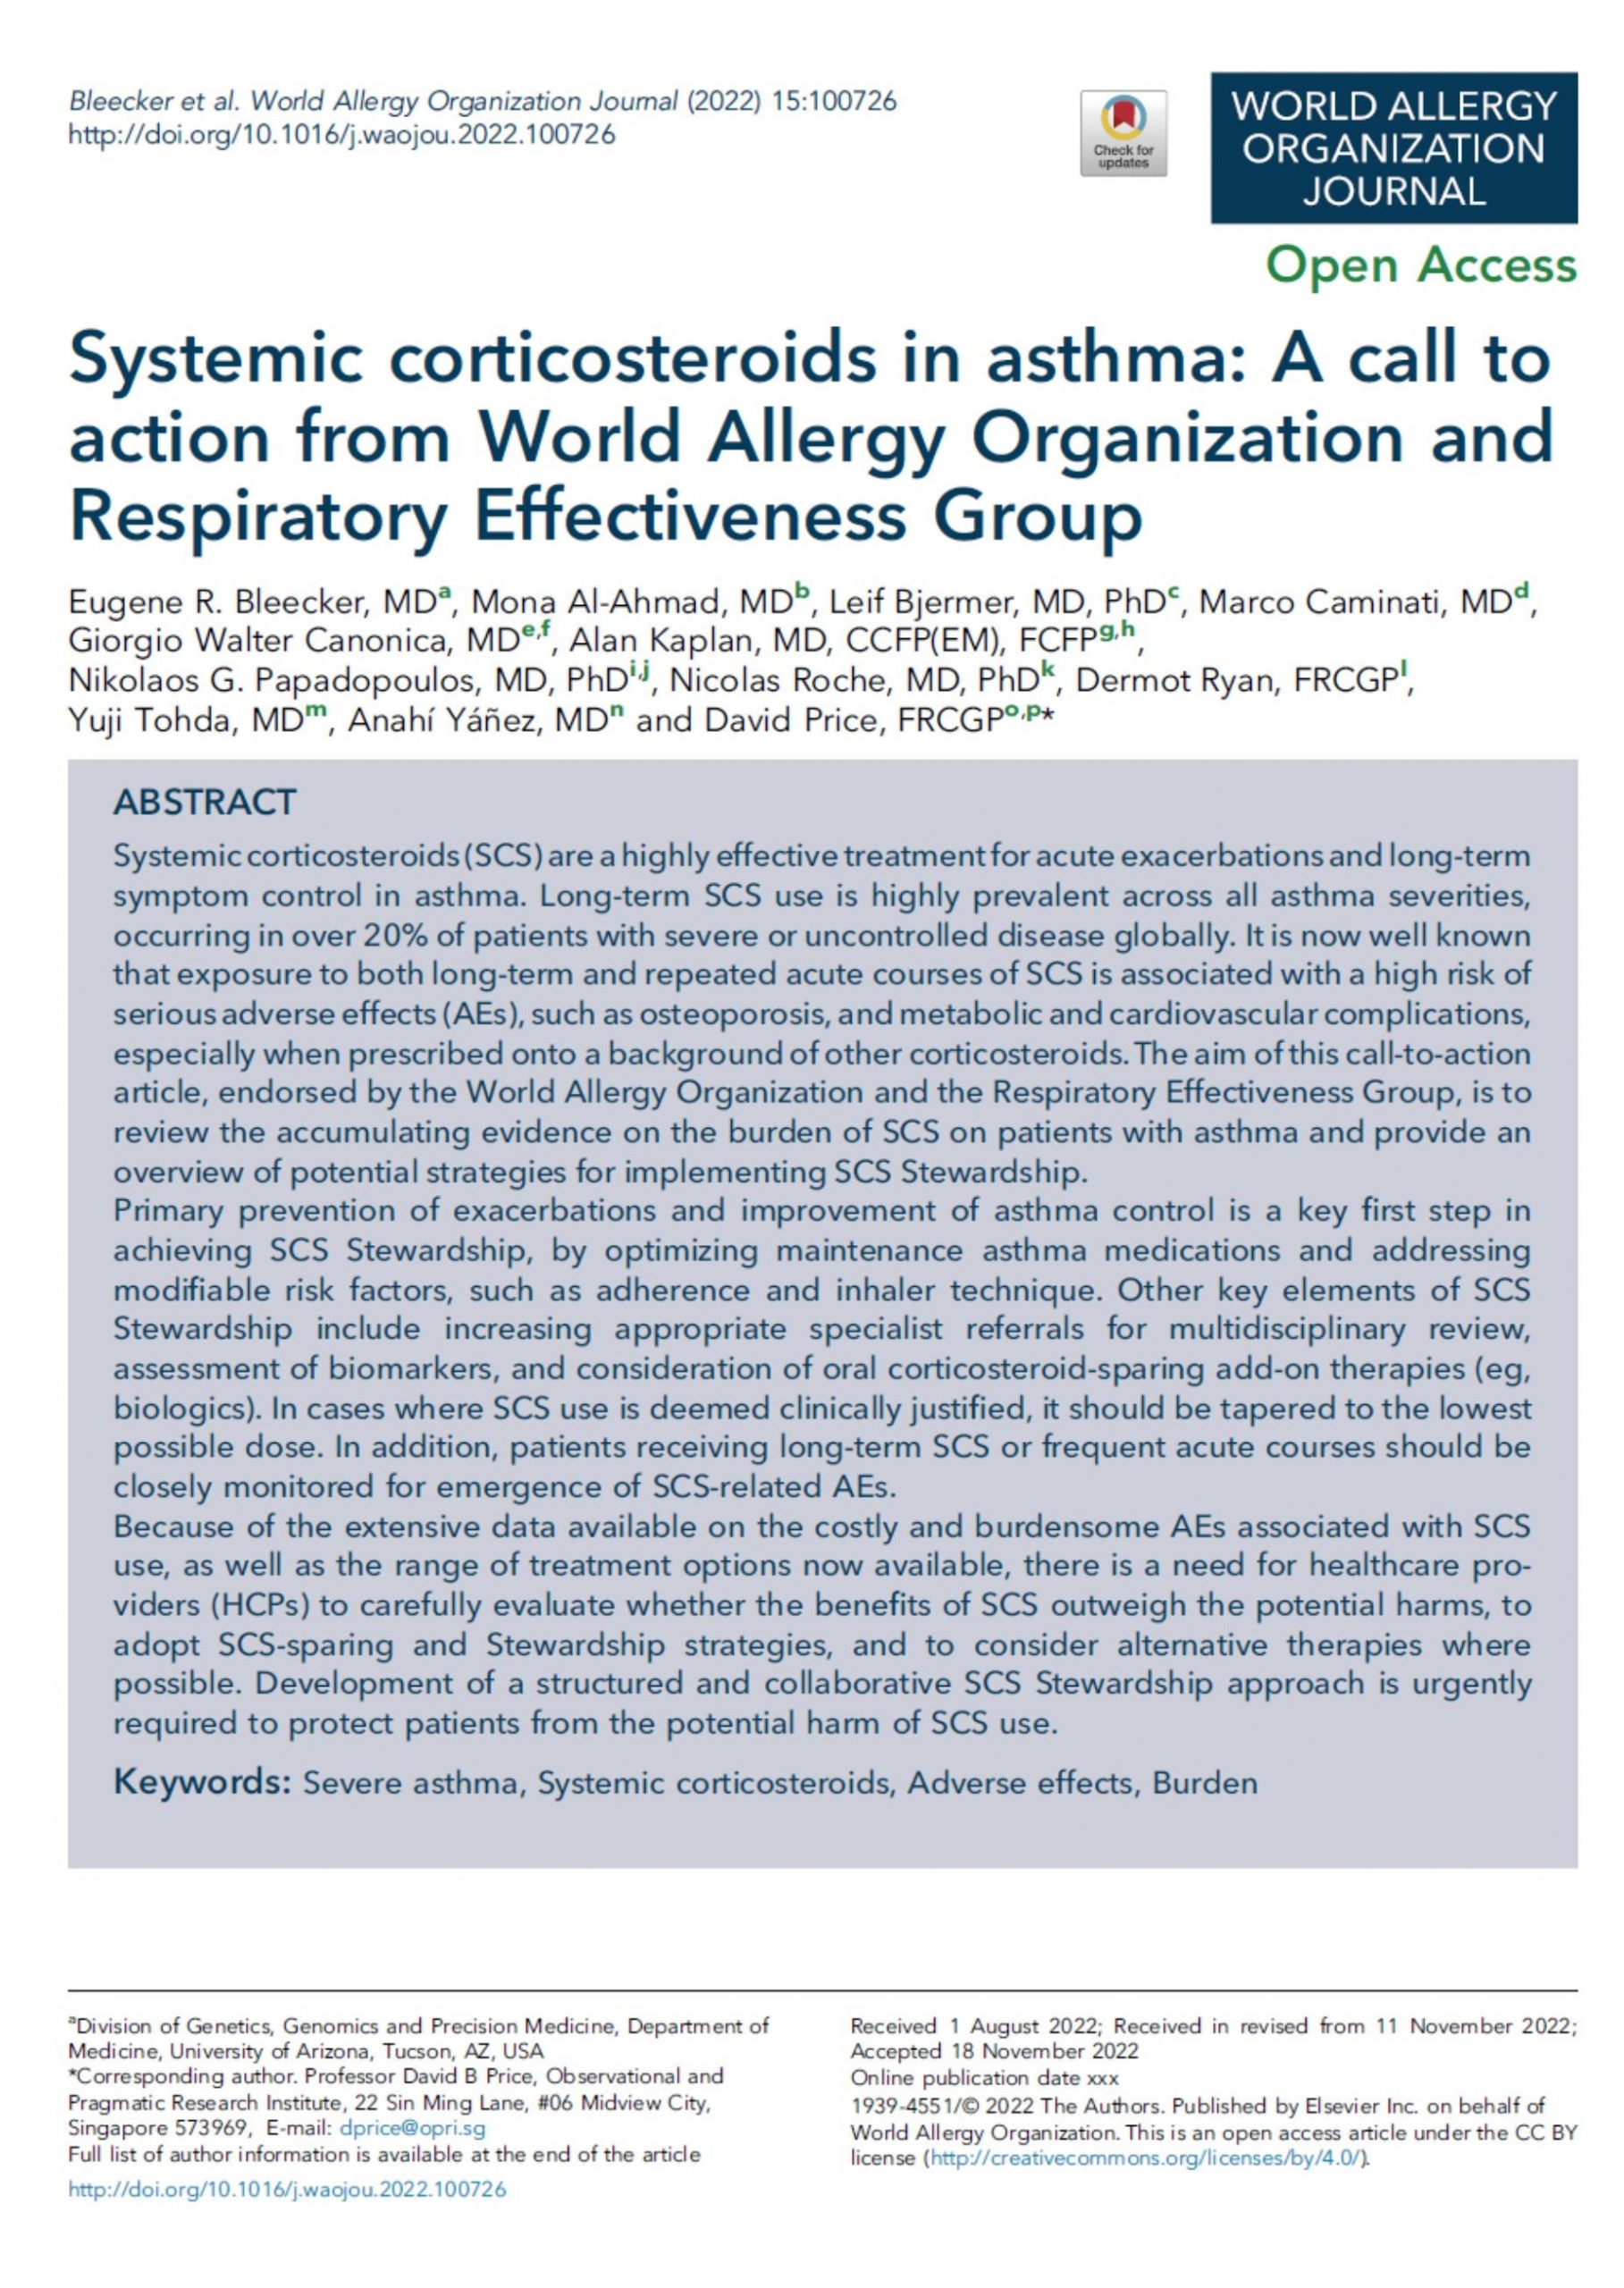 New Publication: Systemic corticosteroids in asthma: A call to action